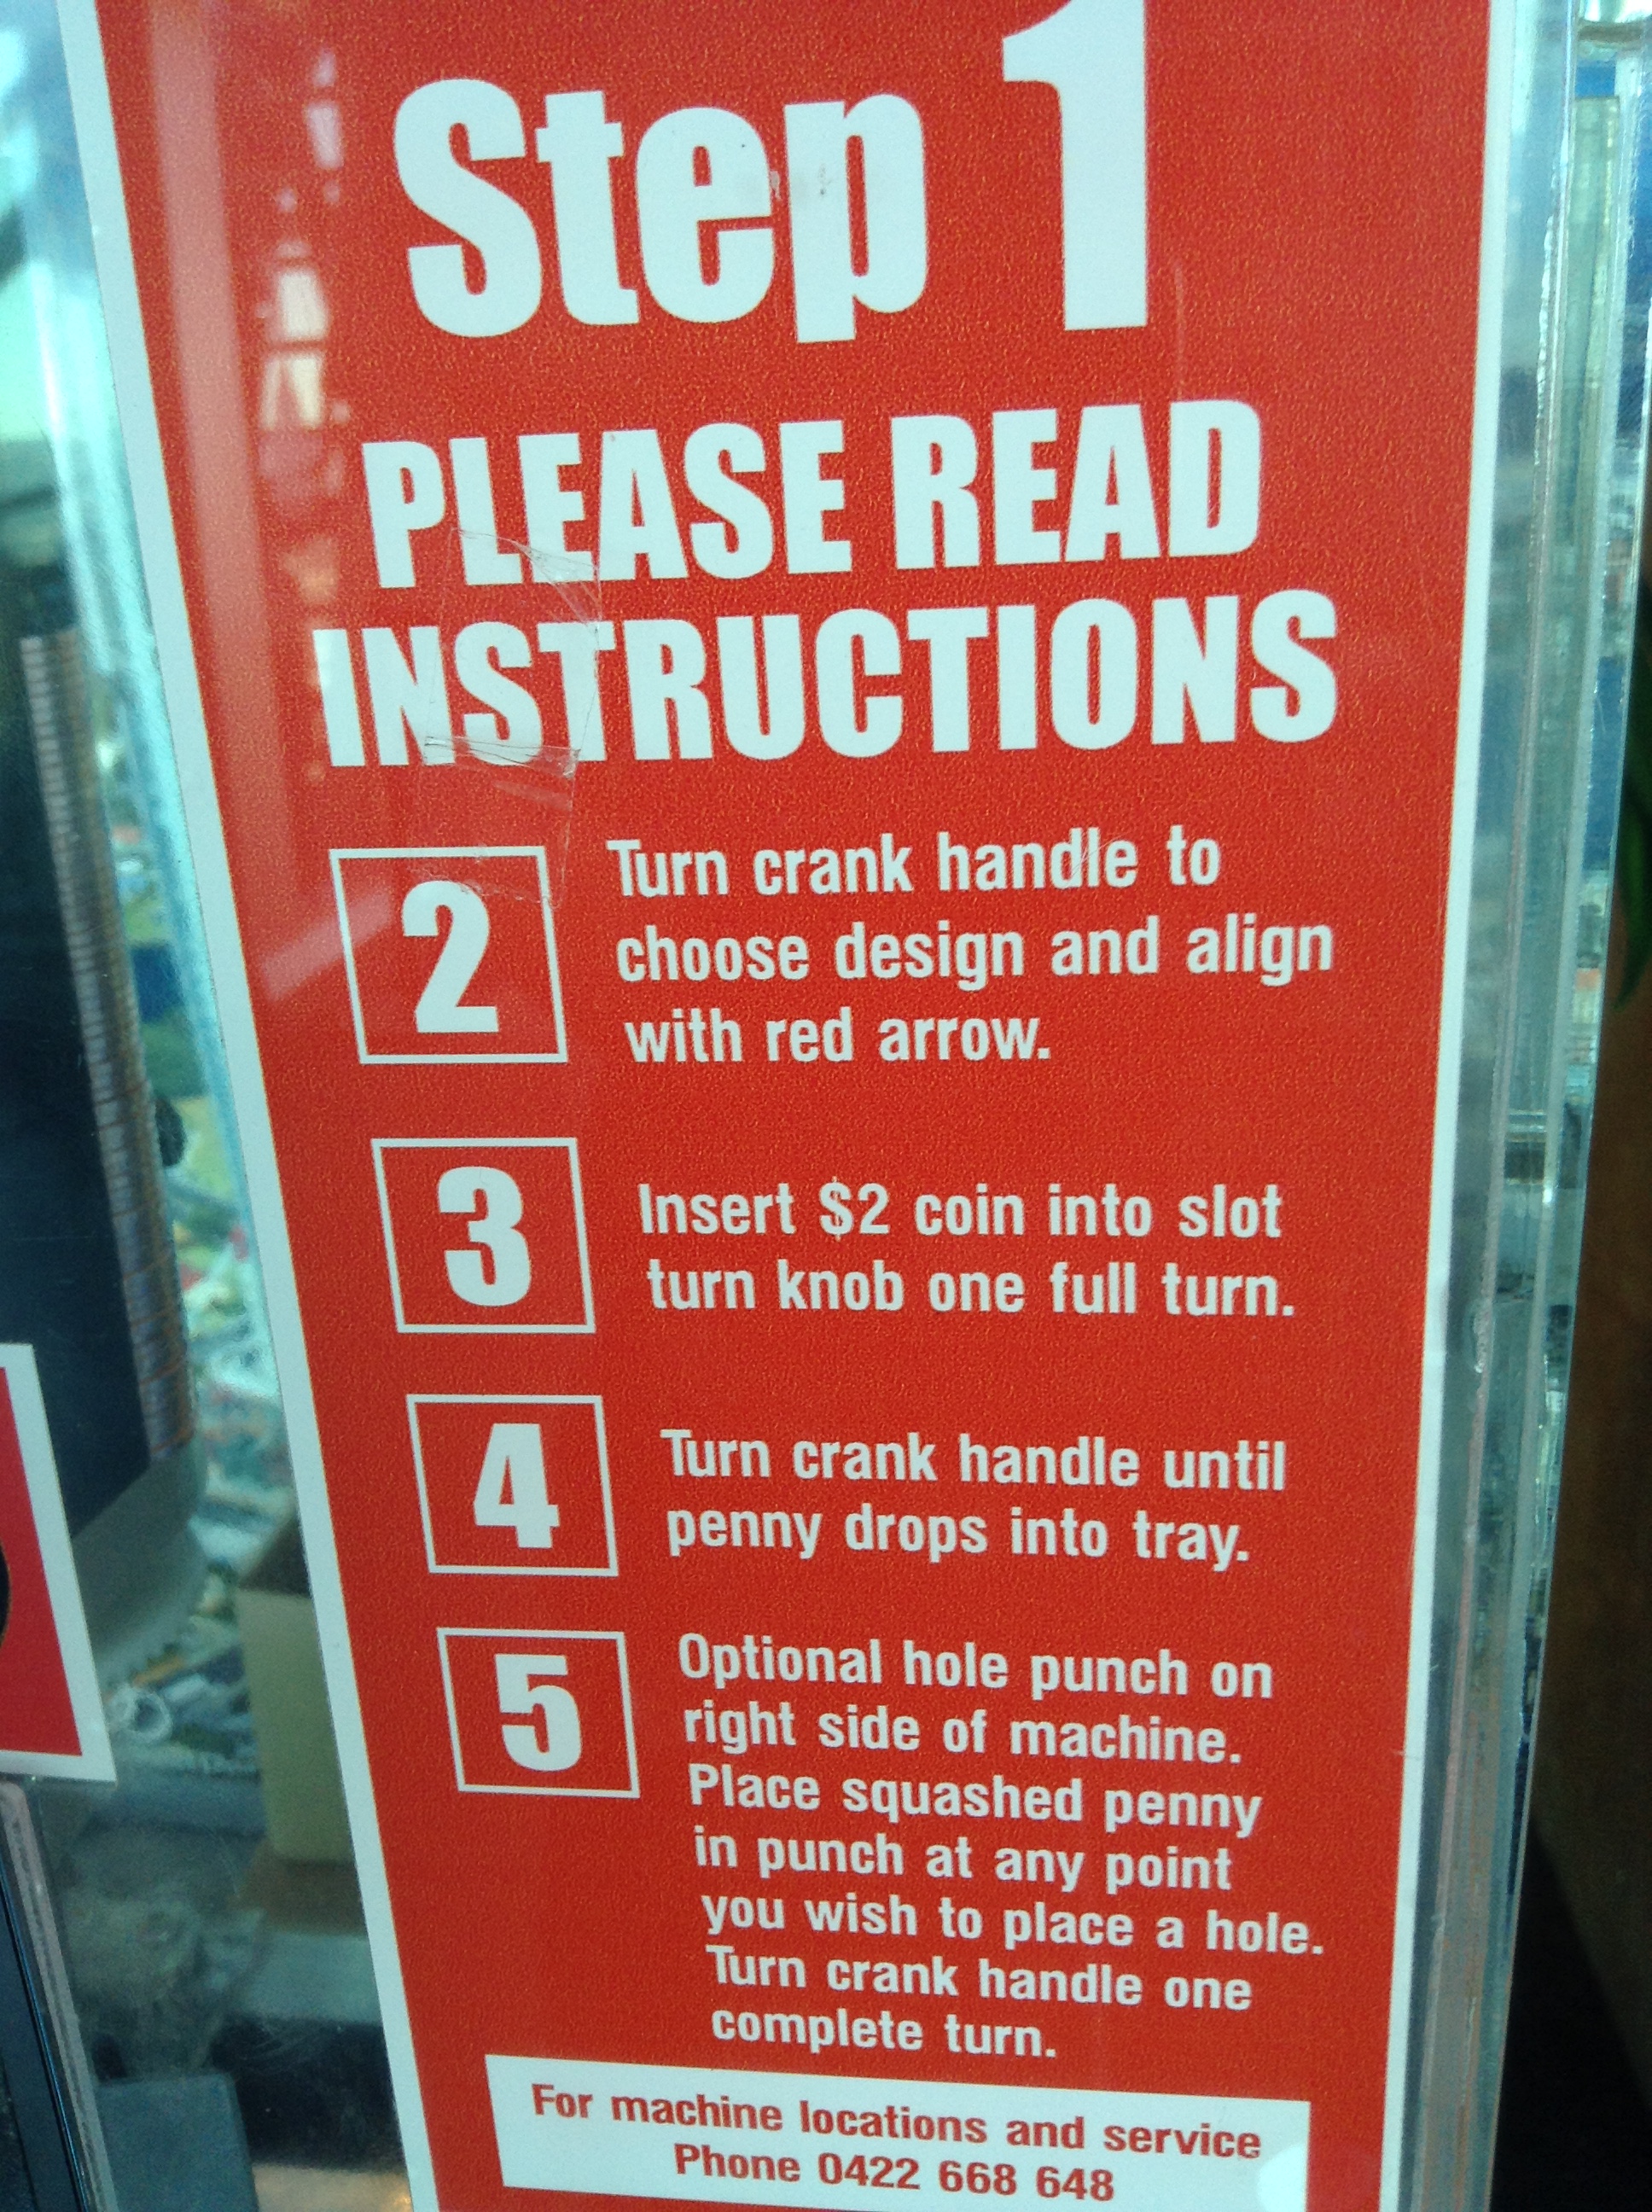 Who need instructions anyway